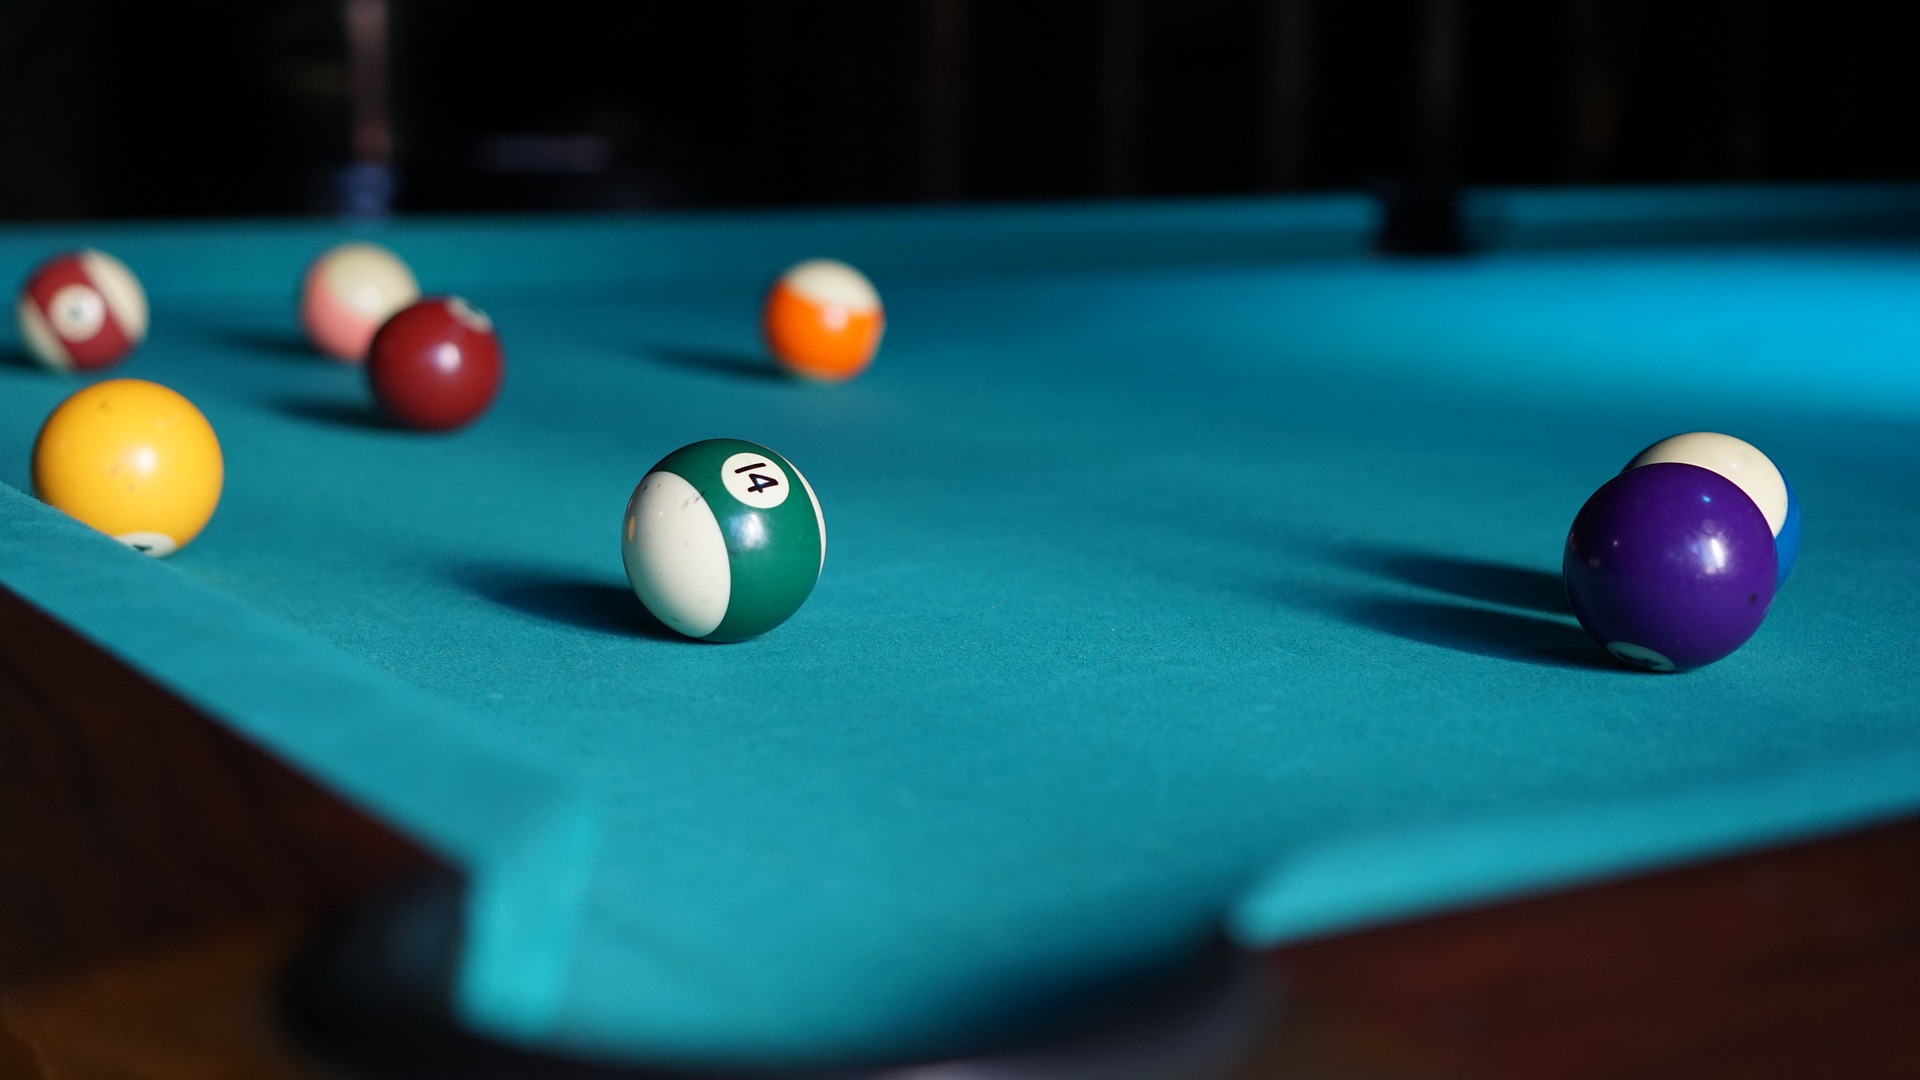 What Are Pool Balls Made Of?